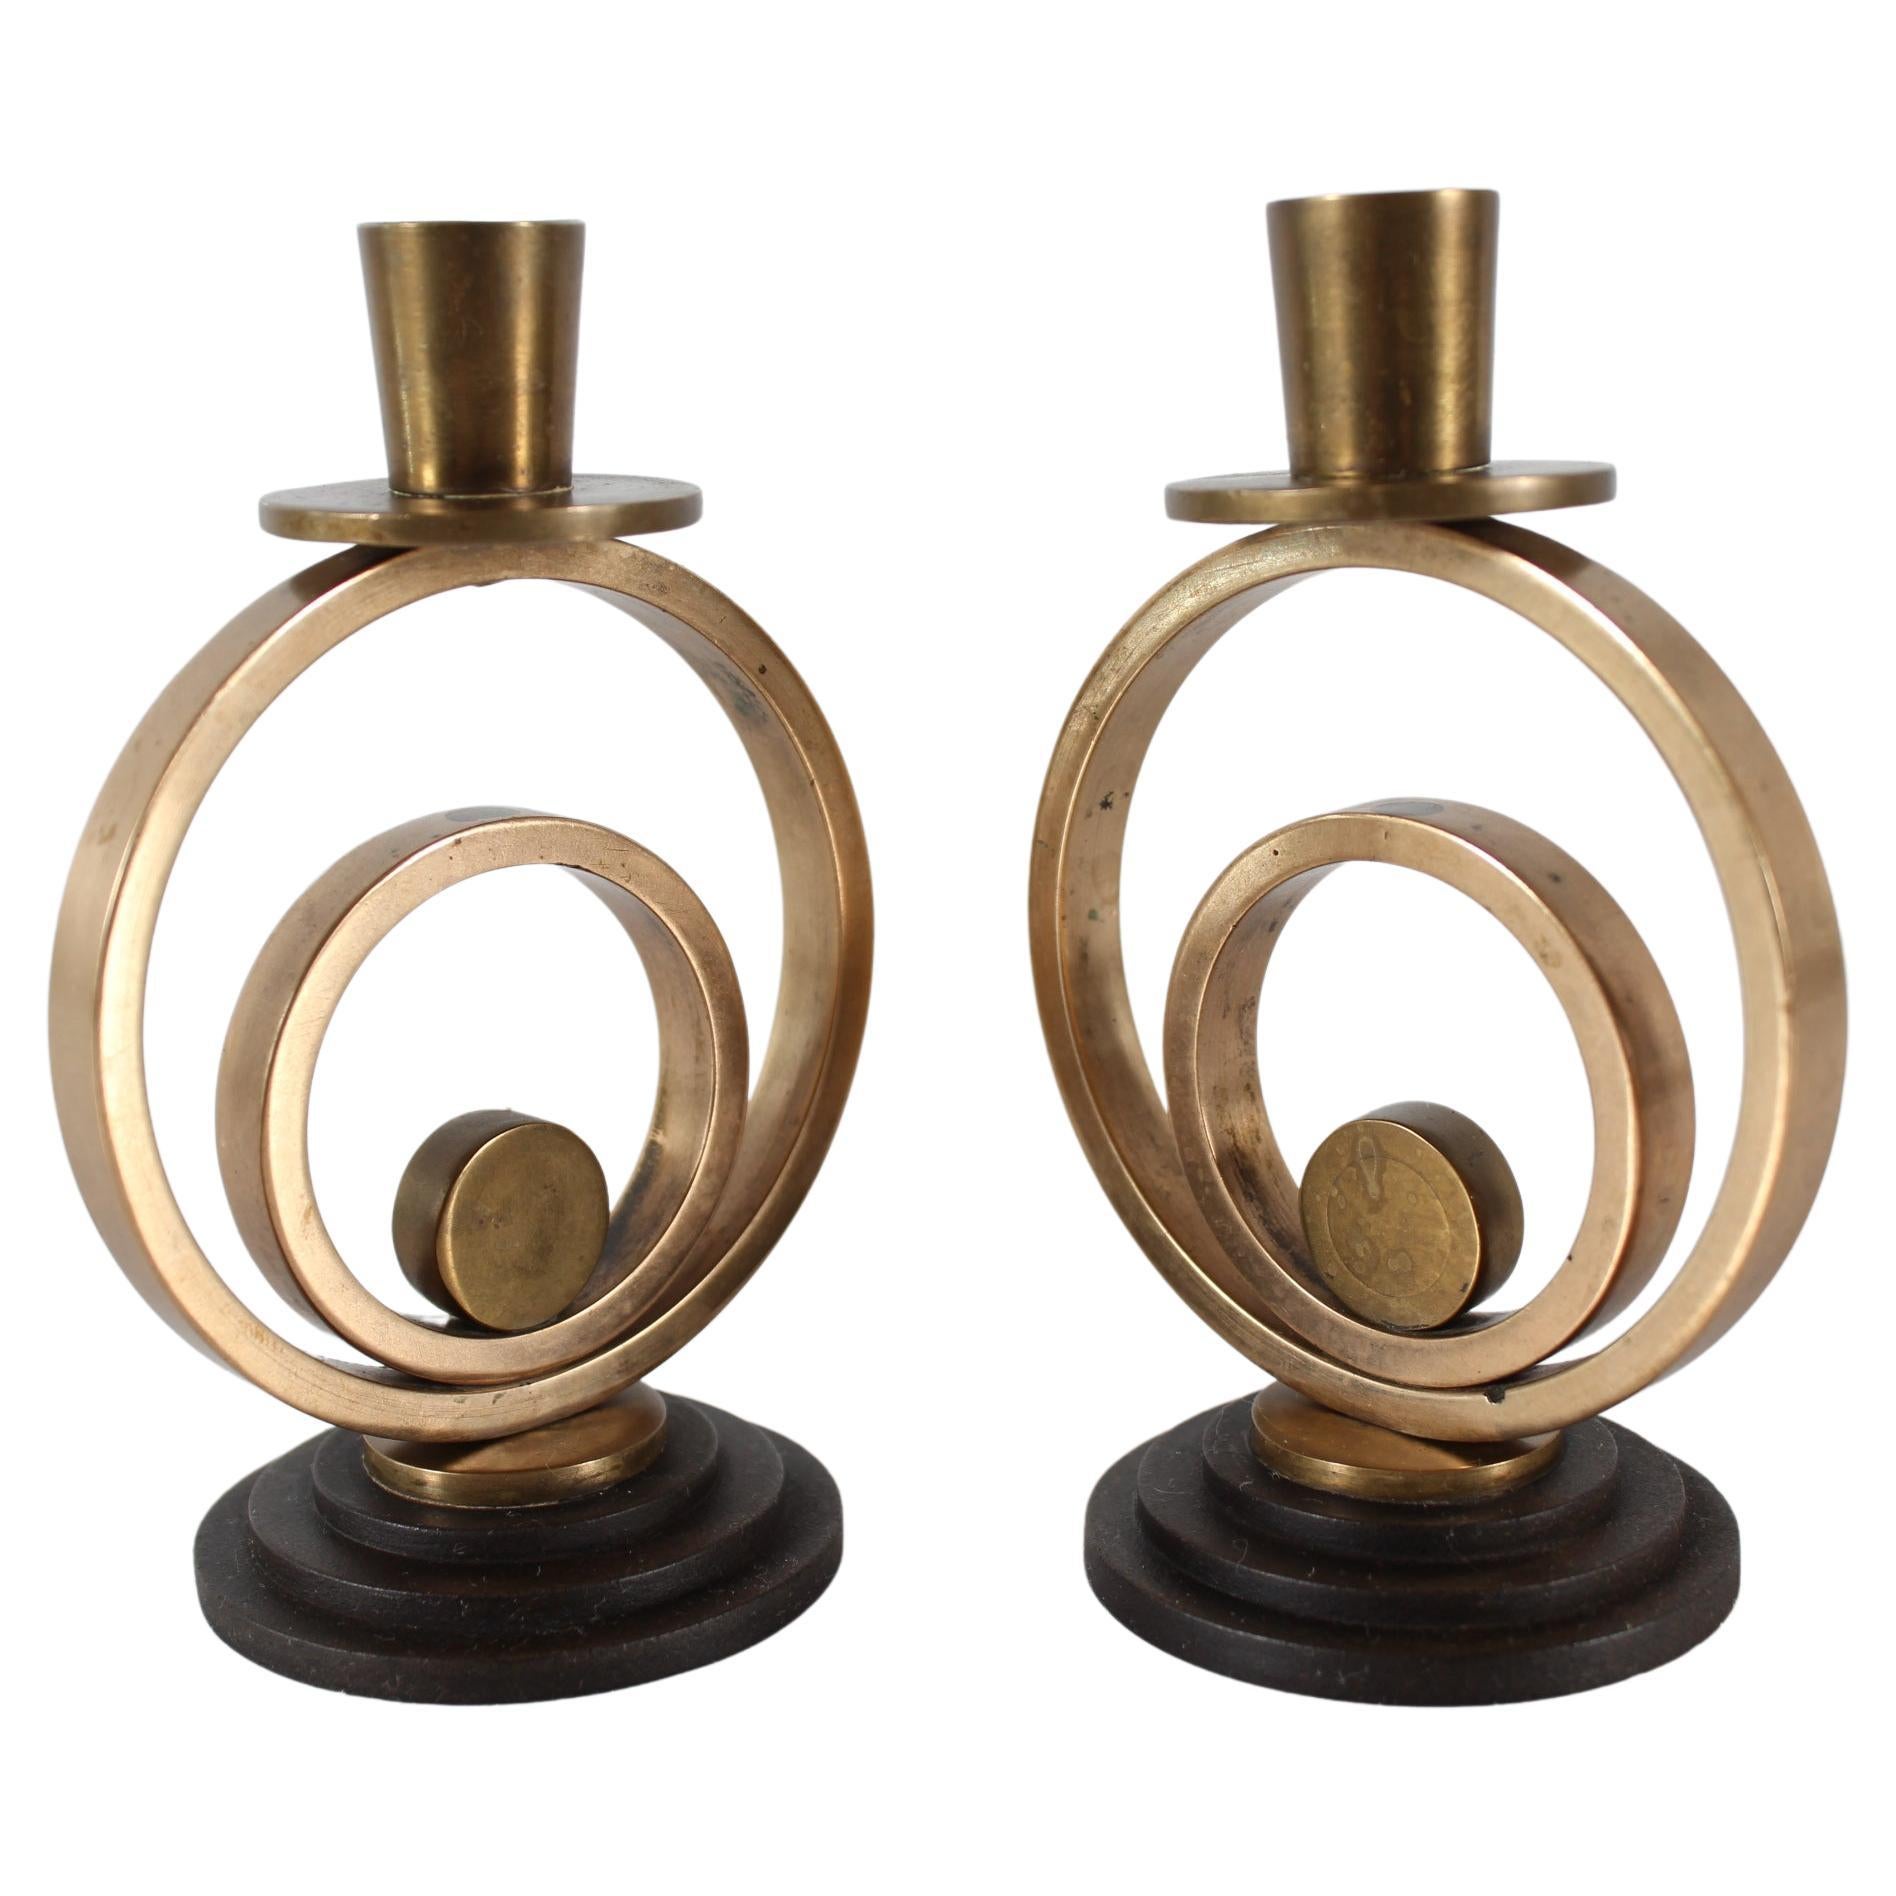 A pair of small Danish Art Deco candlesticks made of patinated brass on feet of turned bakelite-like material.
Designed and made in Denmark in the 1940s

Very nice used condition with good patina.